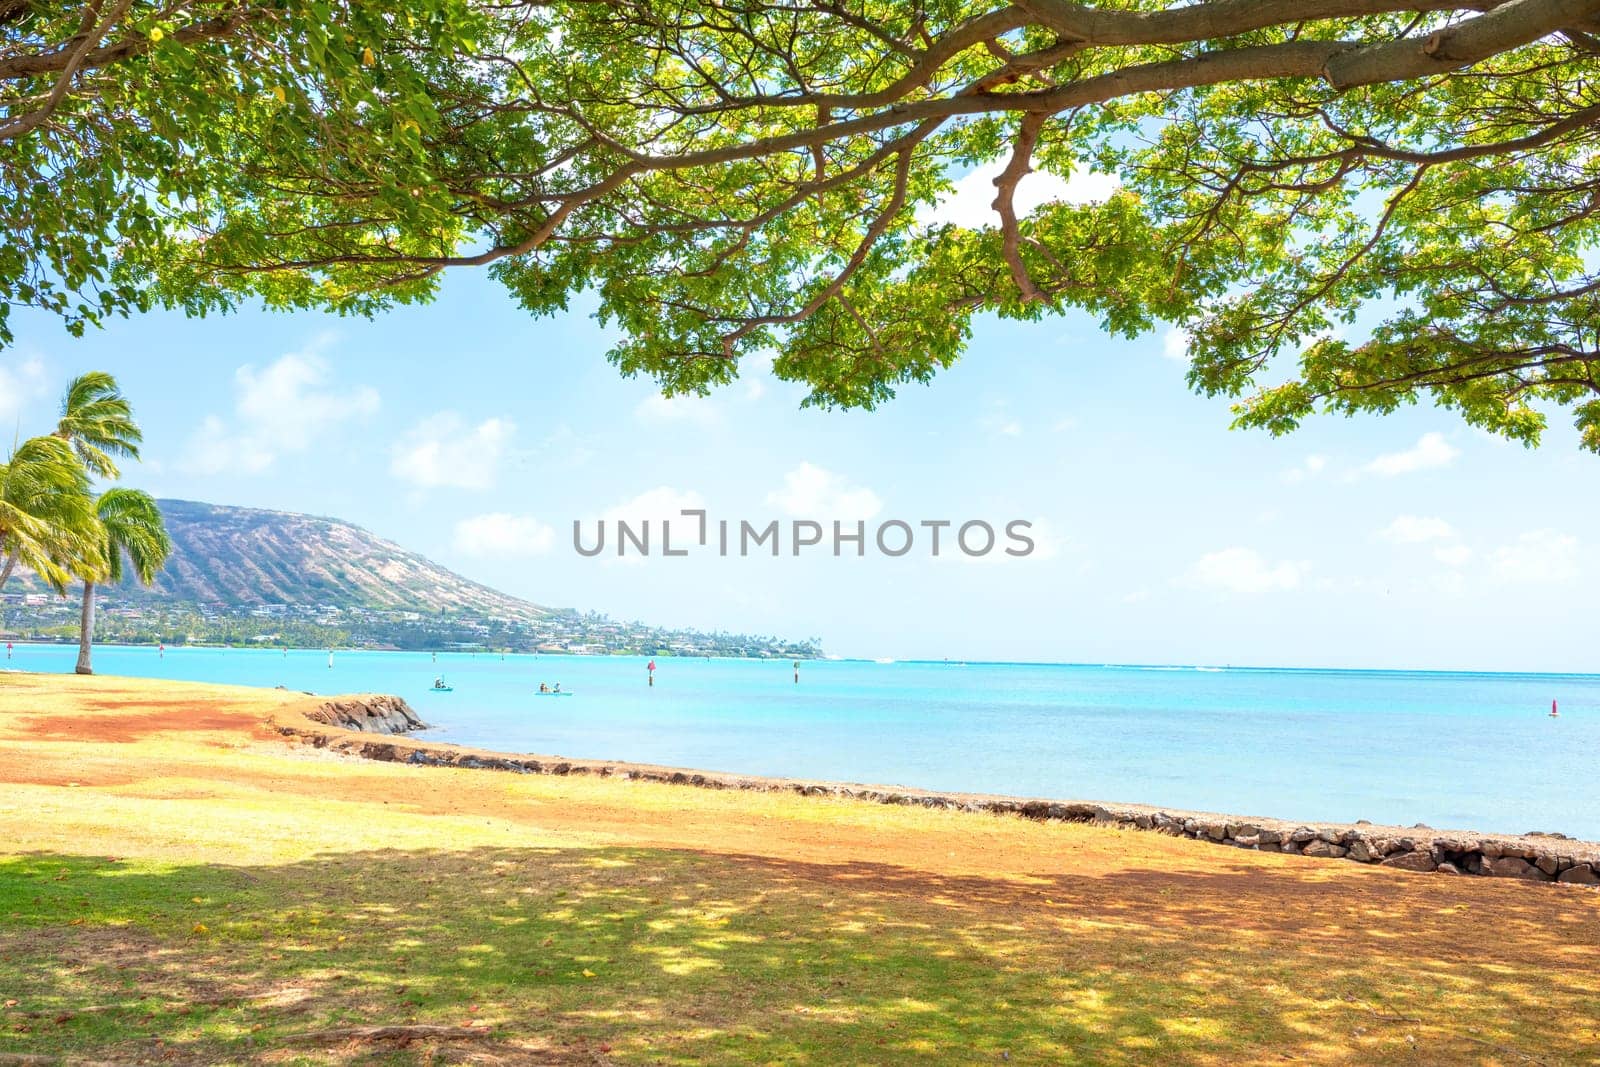 View of Kokohead Crater, Oahu, from under large shade tree by jarenwicklund